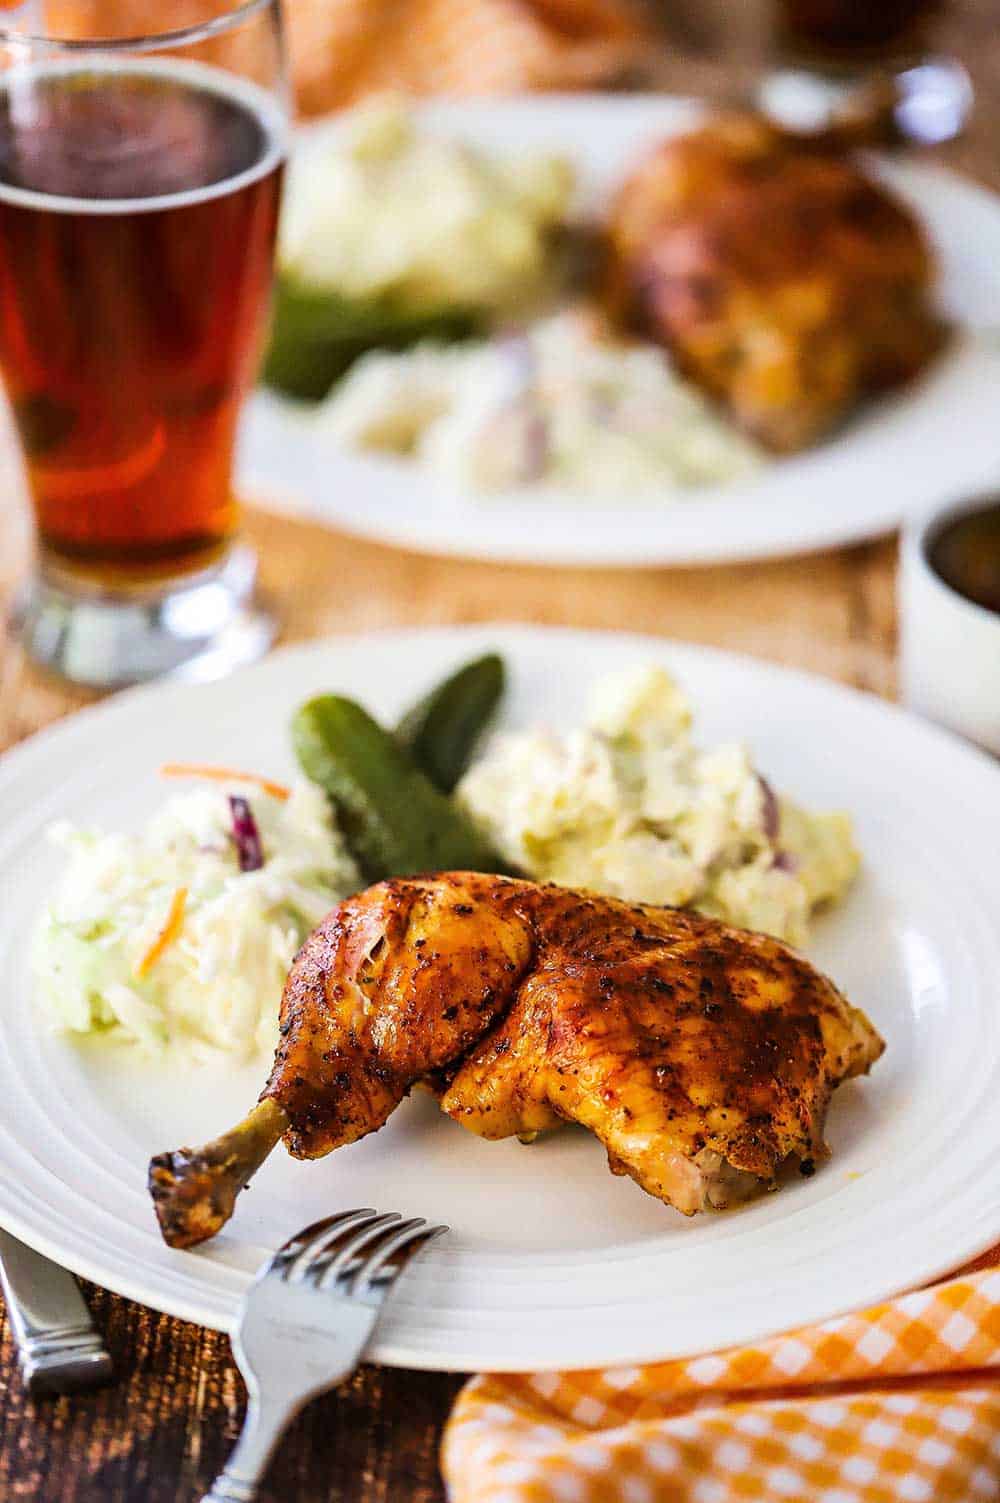 A white dinner plate filled with a beer can chicken let quarter and coleslaw, pickles, and potato salad.